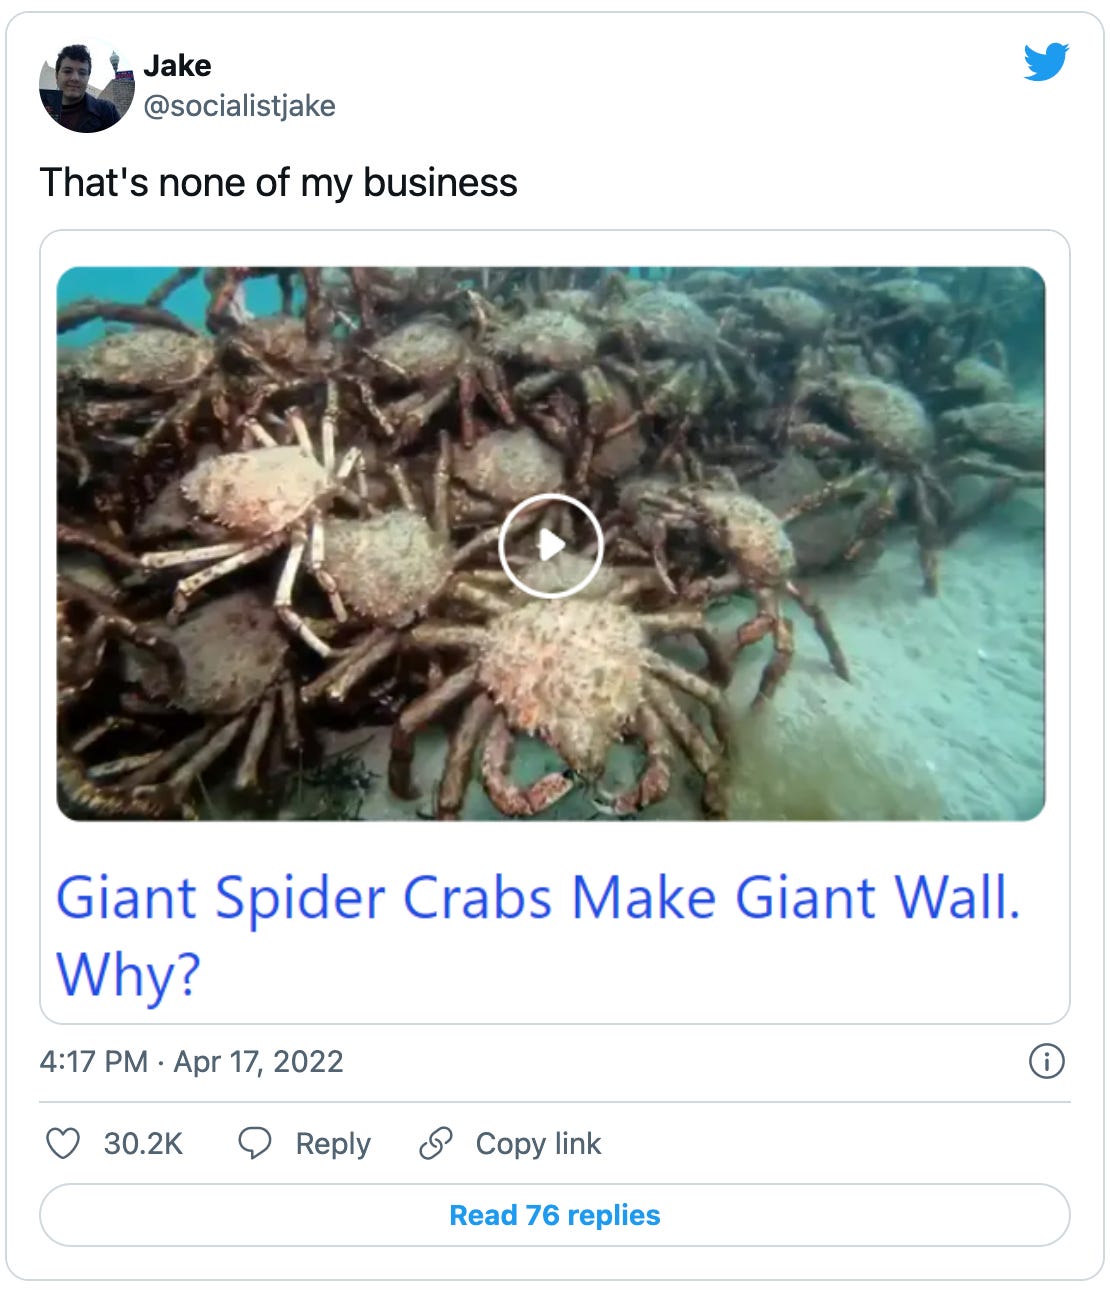 Tweet by @socialistjake that says “That’s none of my business” above a screenshot of a picture of lots of crabs underwater with the headline “Giant Spider Crabs Make a Giant Wall. Why?”